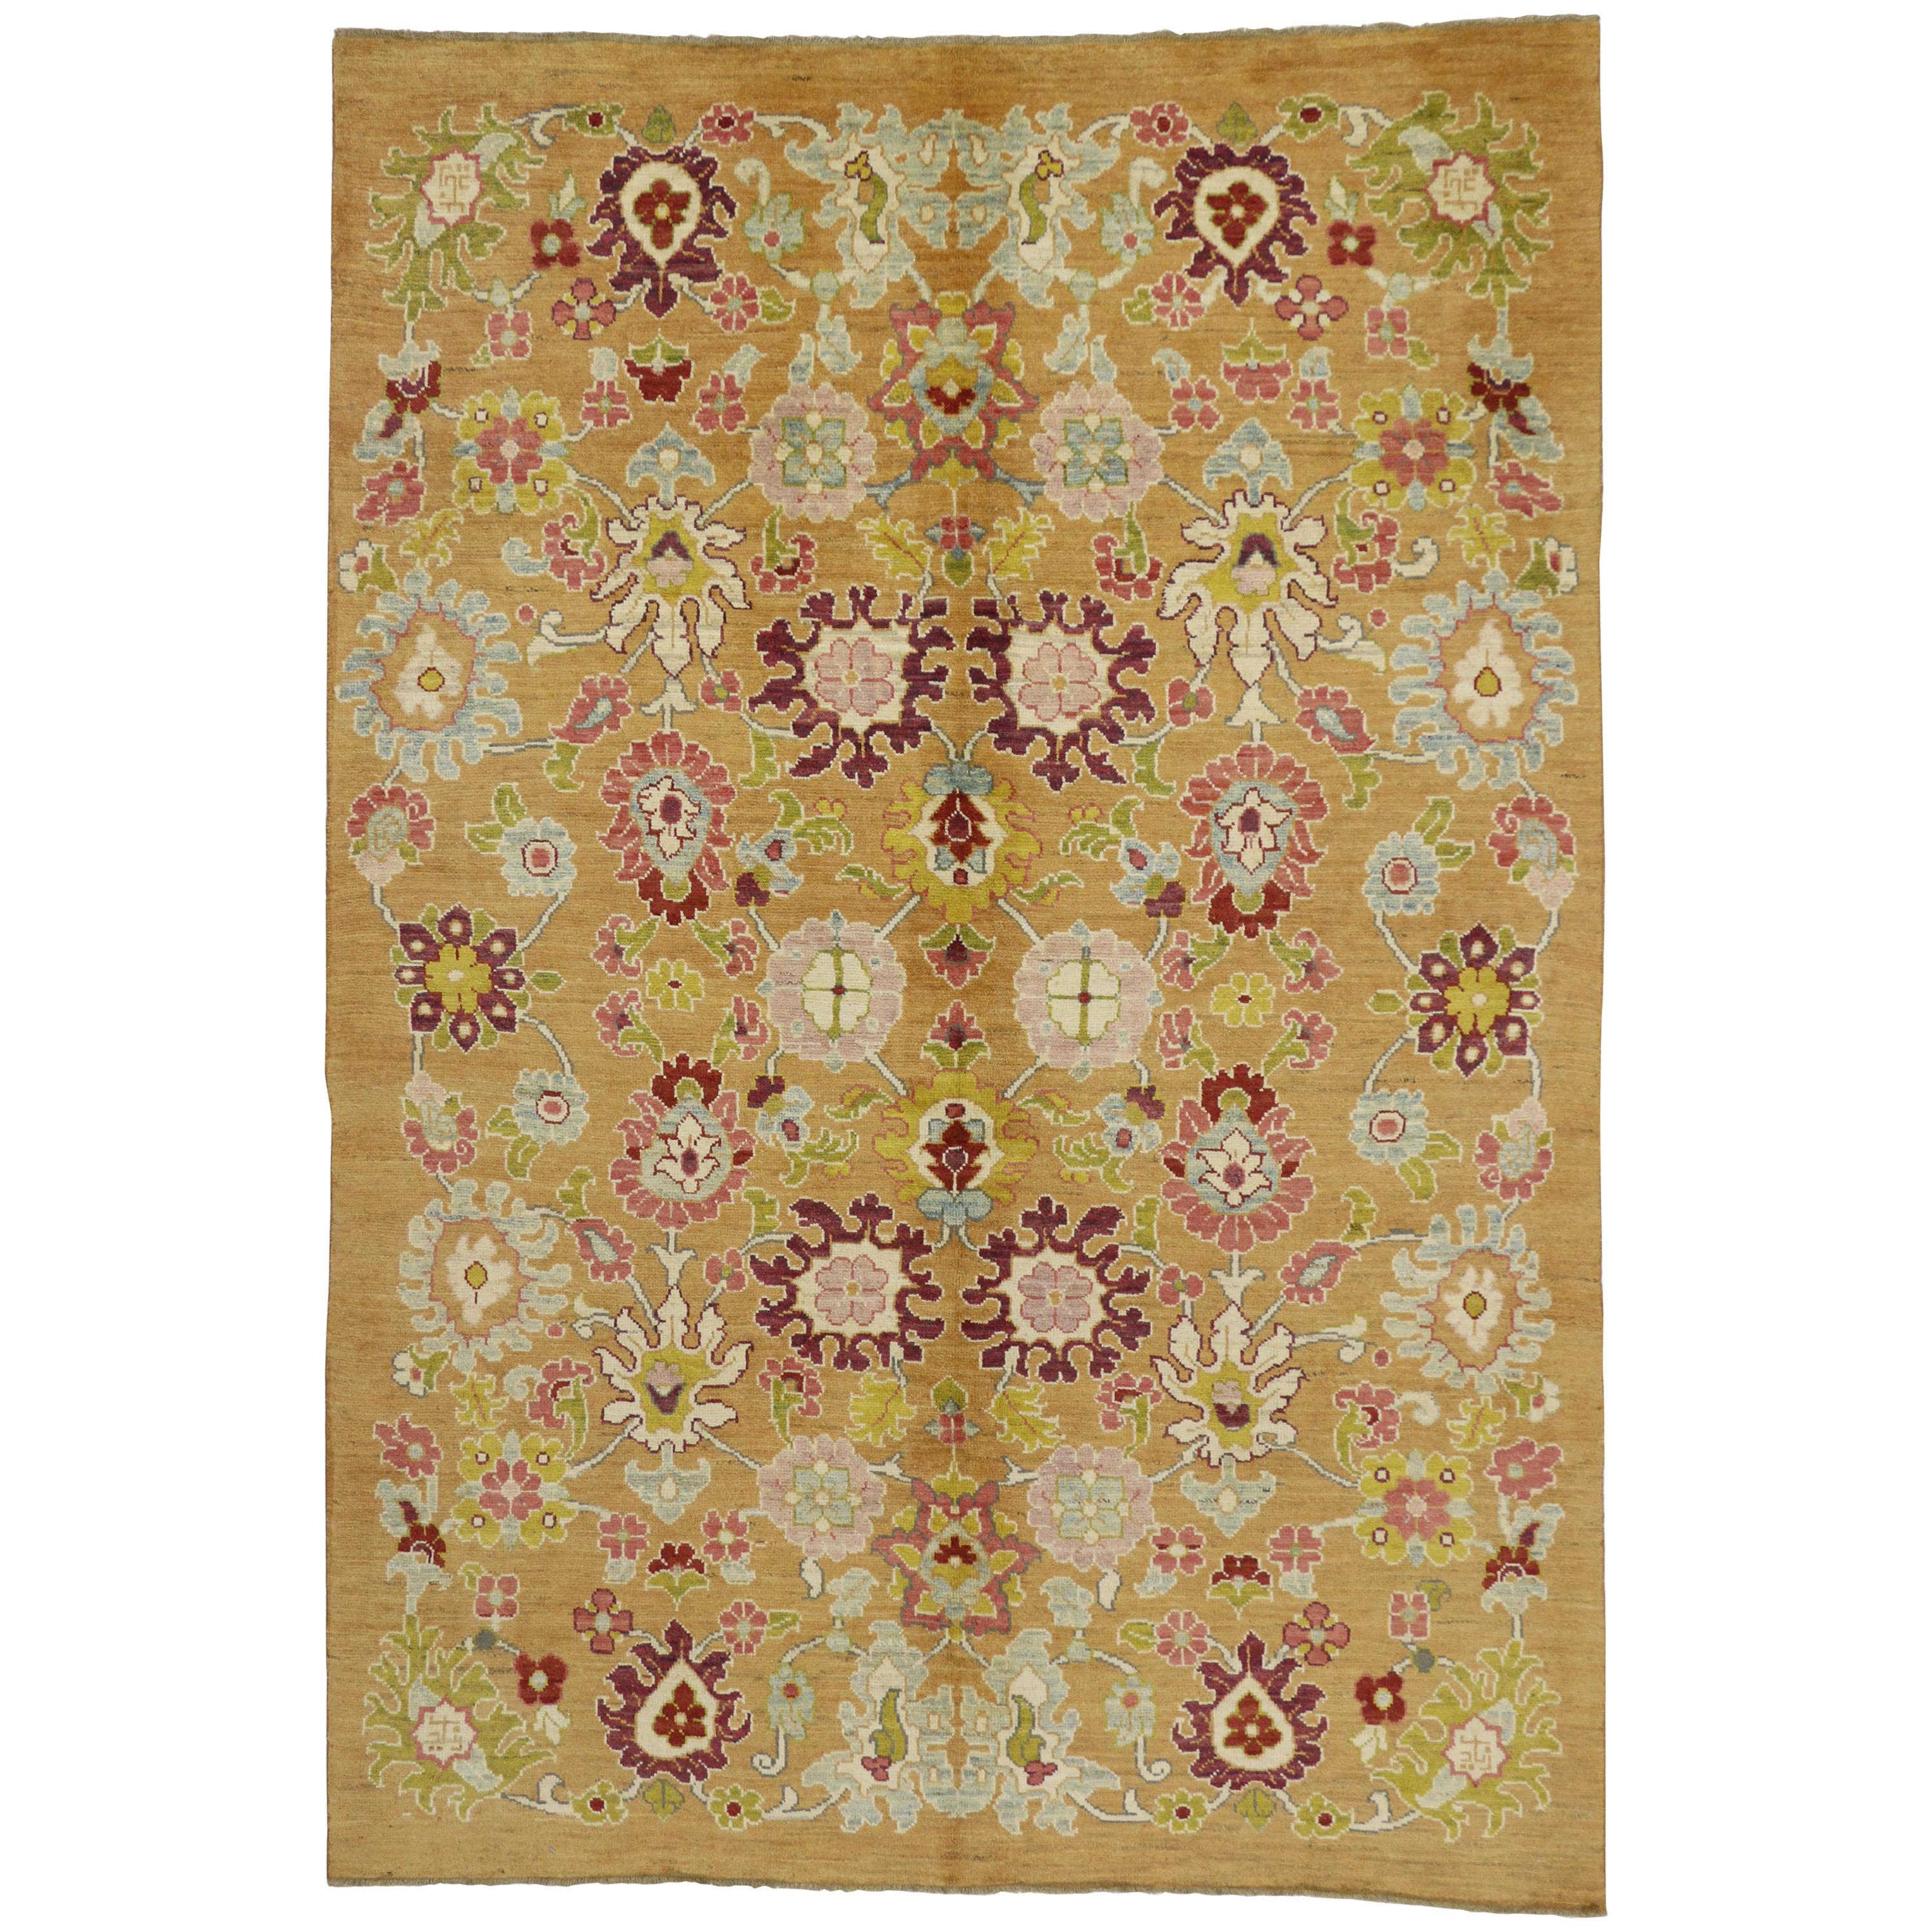 New Colorful Turkish Oushak Rug with Modern Contemporary Style